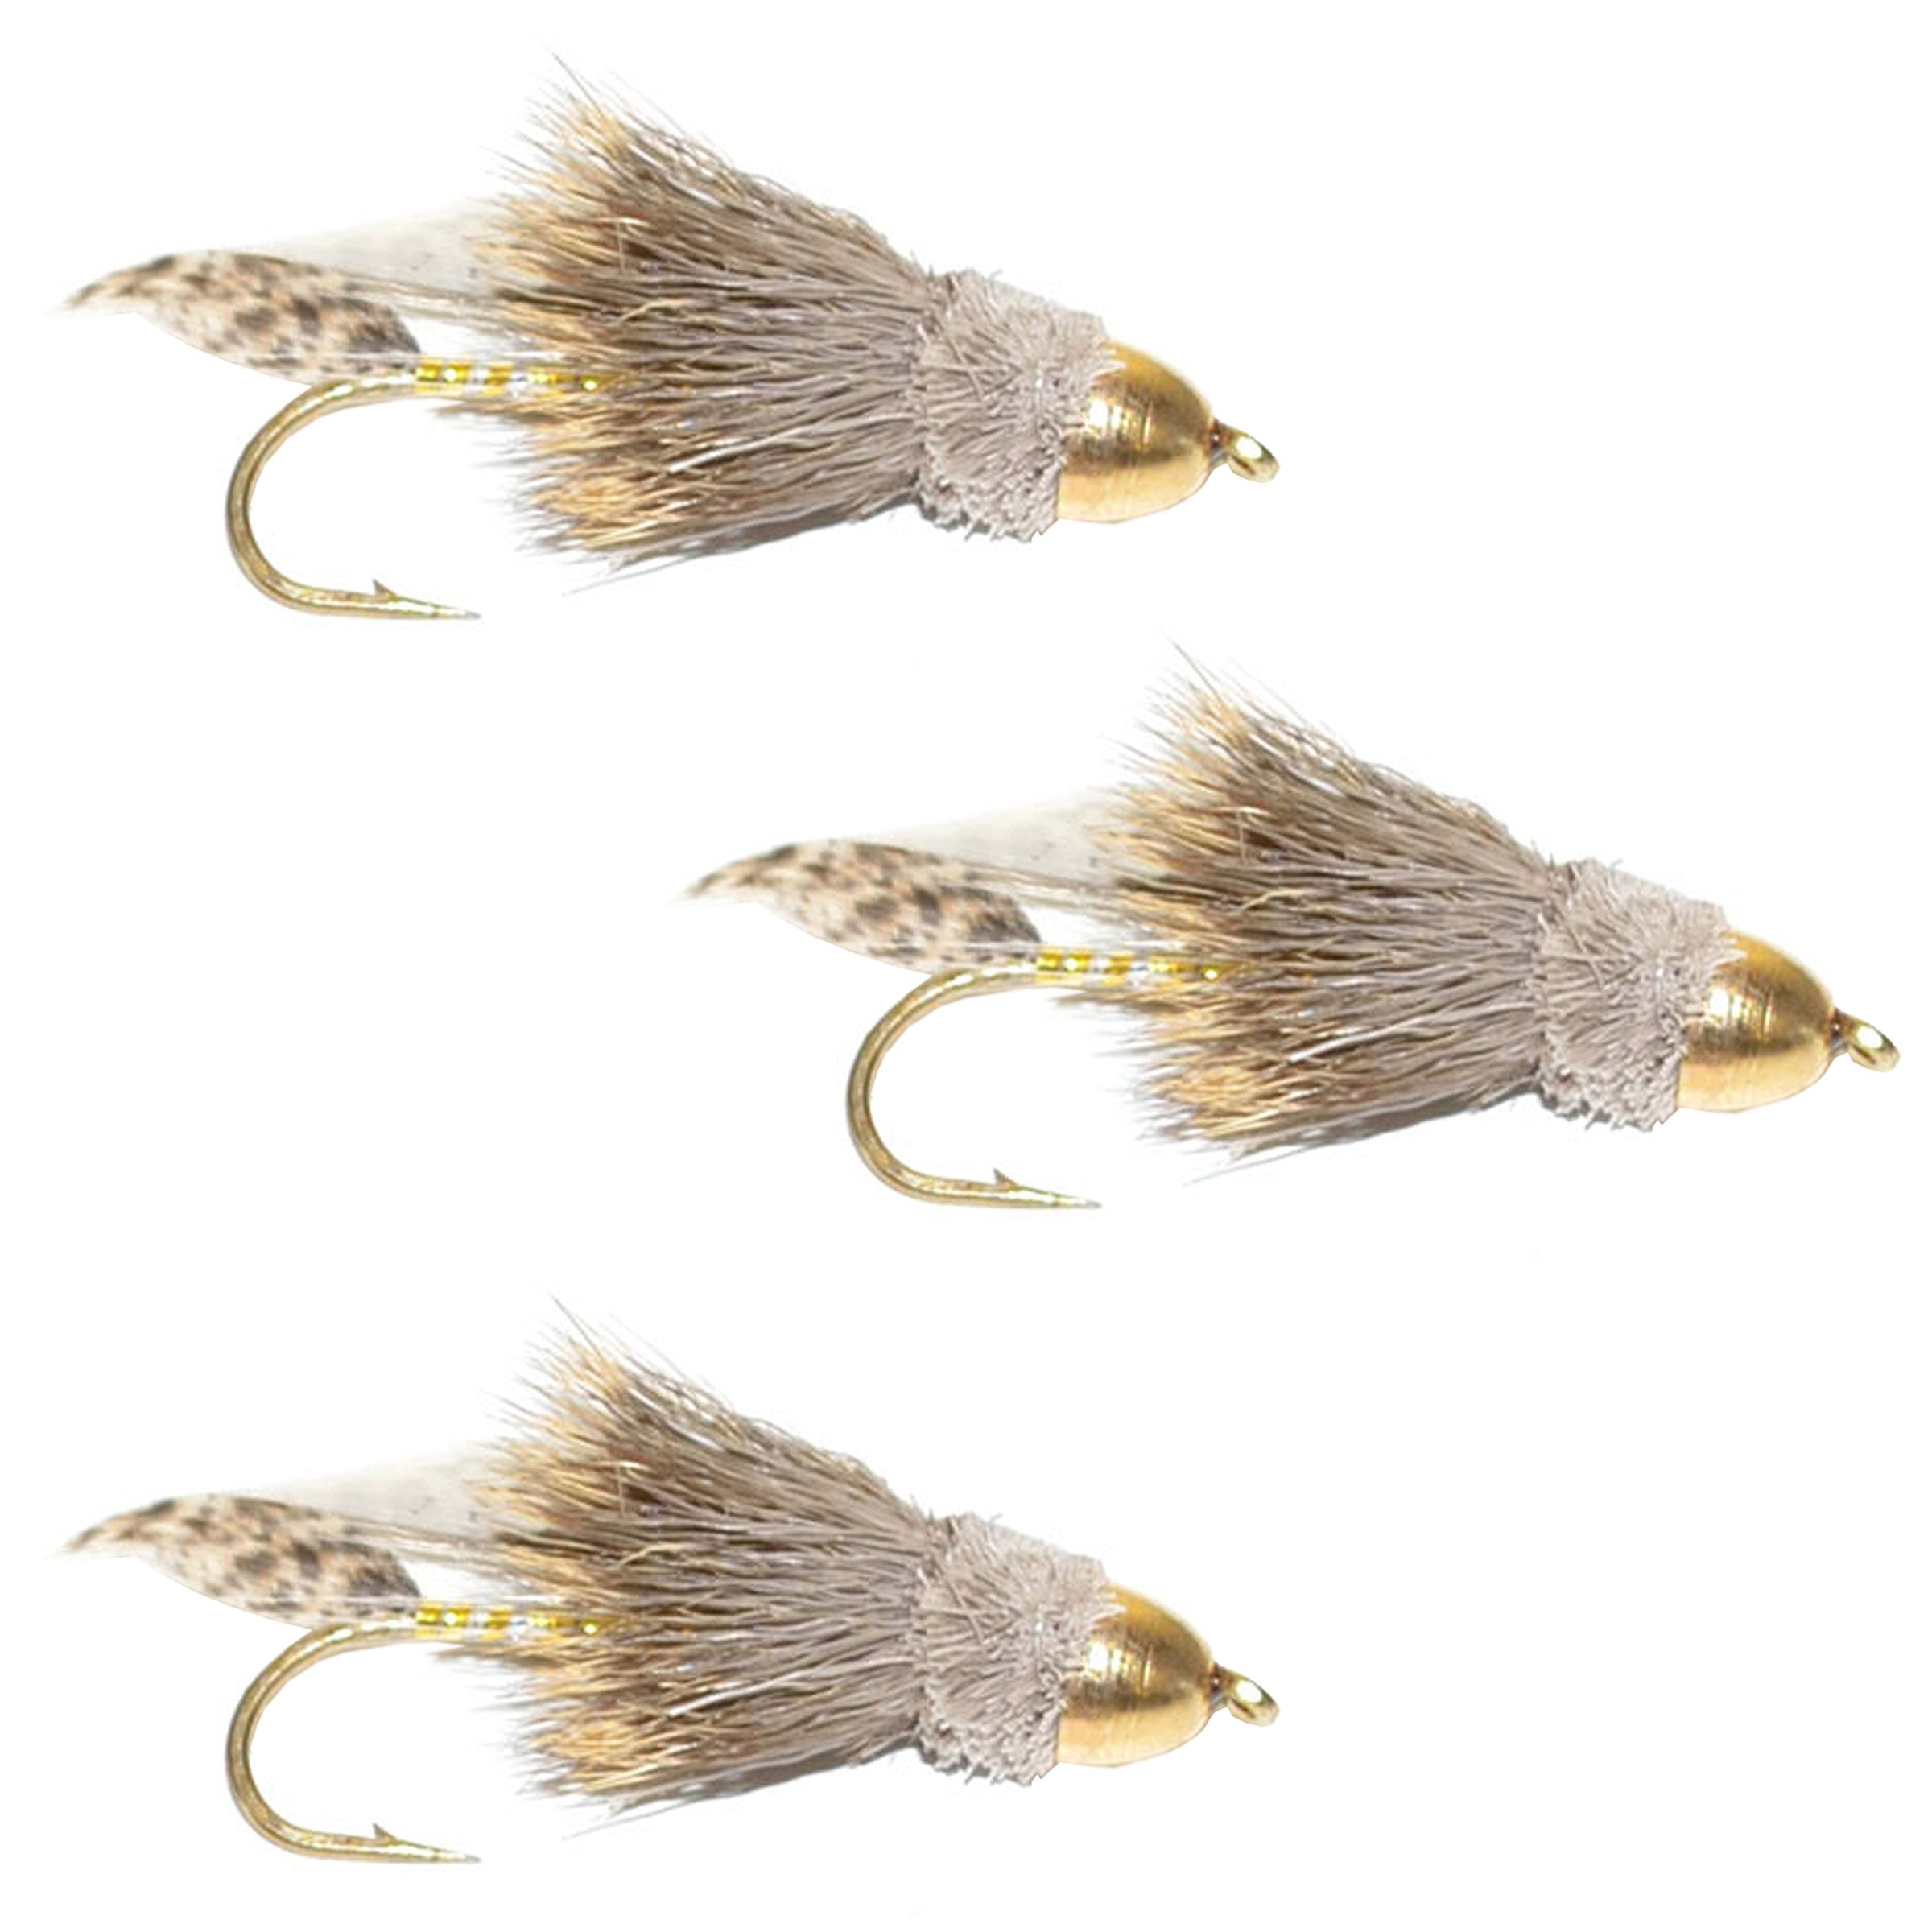 3 Pack Cone Head Muddler Minnow Trout and Bass Streamer Fly - Hook Size 6